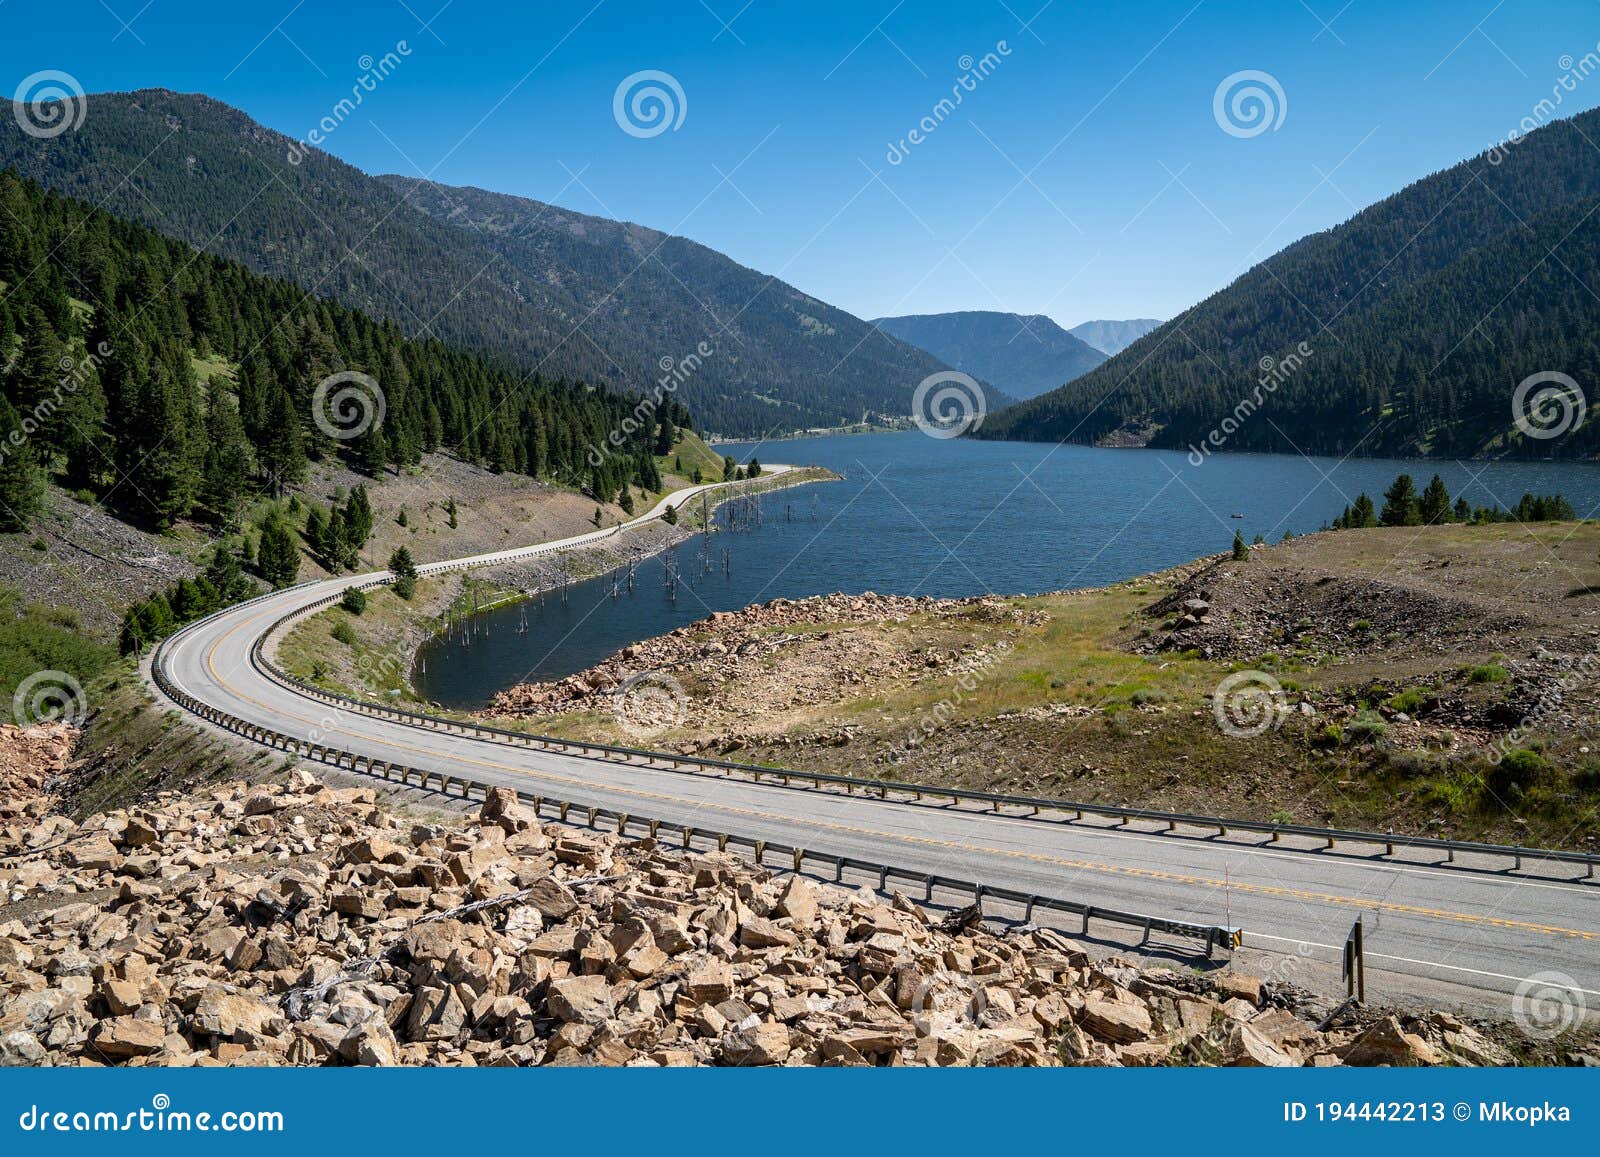 earthquake lake in montana, summer scene with the highway in view